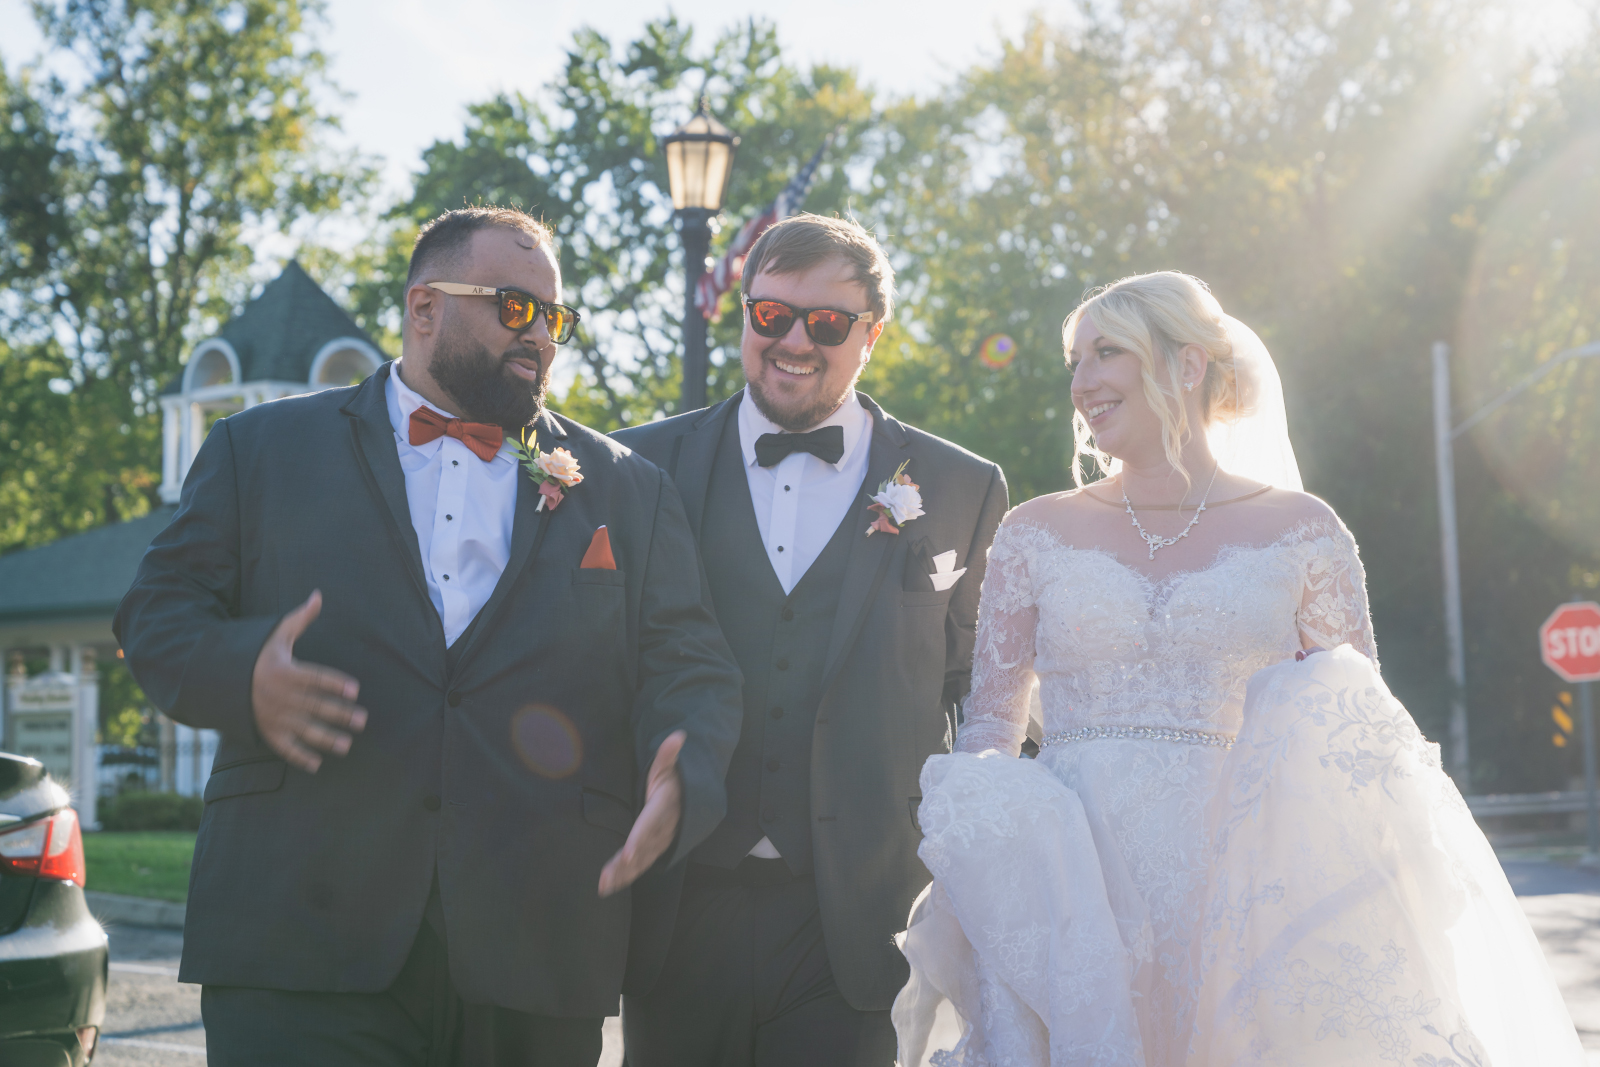 Bride and groom with groomsmen, walking, sunglasses, sunlight, lens flare, smiling, laughing, candid wedding photo, fall wedding, cute outdoor wedding ceremony at Grand Pacific Wedding Gardens